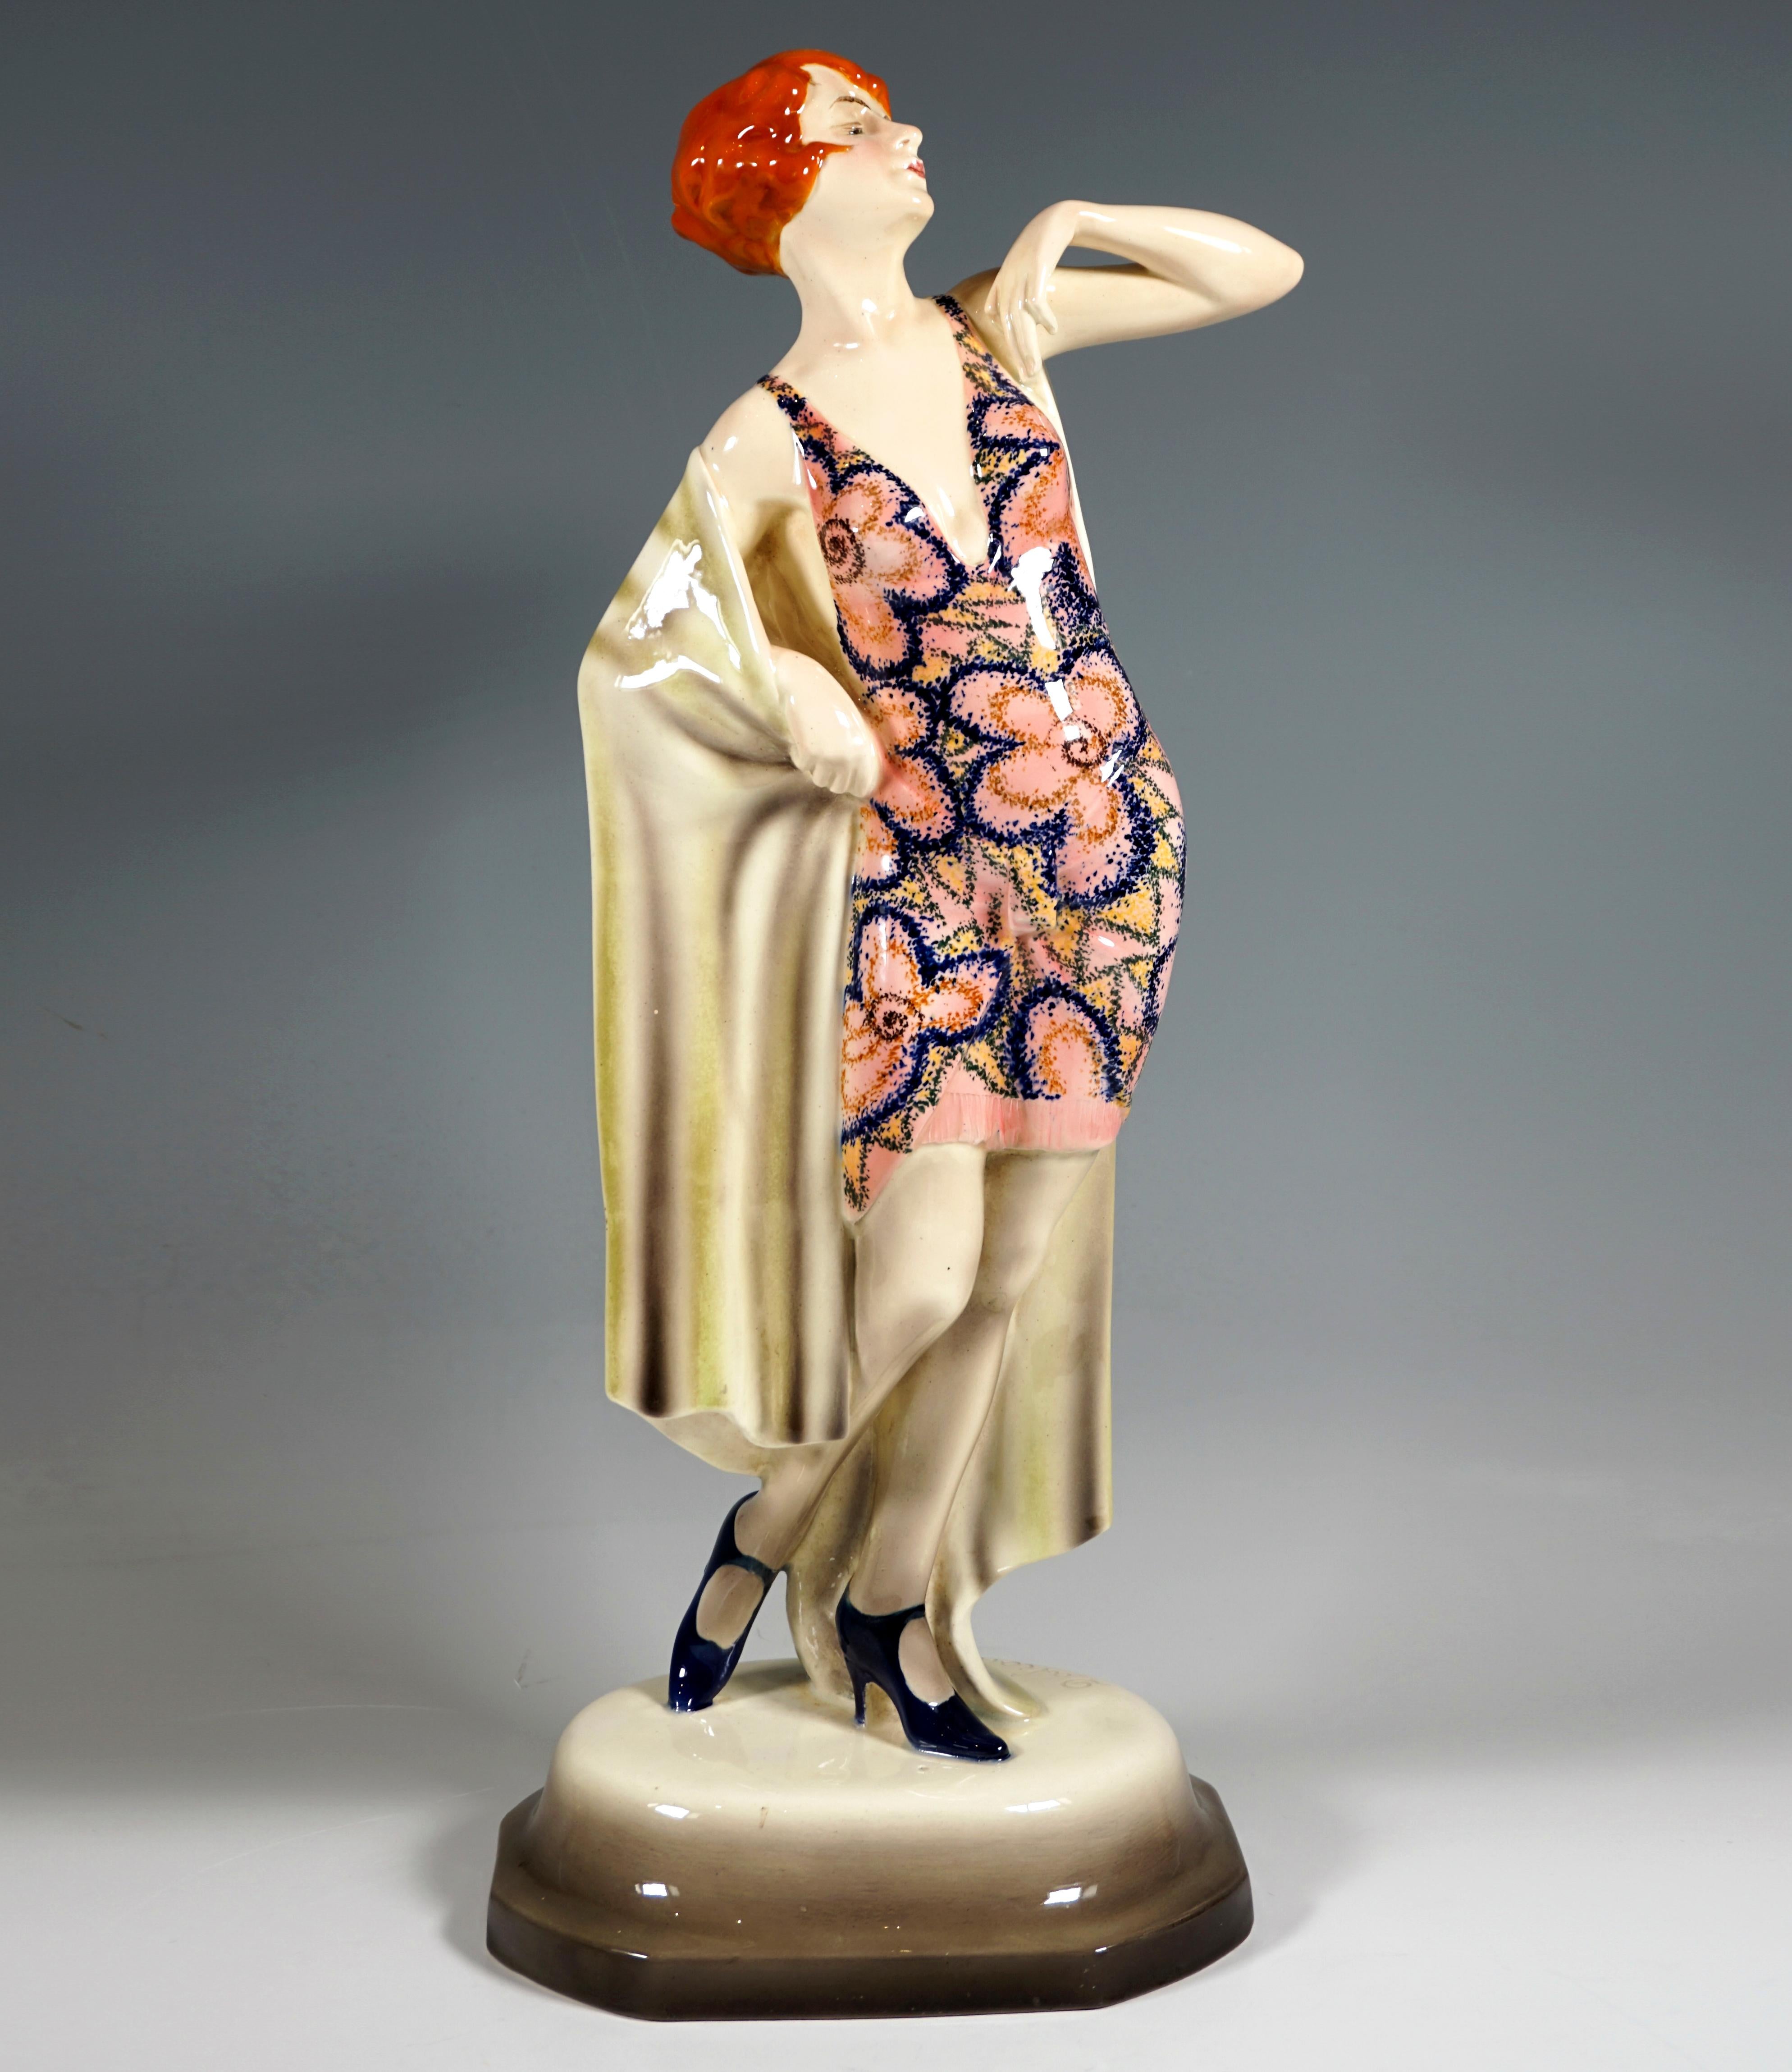 Rare Large Goldscheider Art Deco Ceramic Figurine of the 1920s:
Young lady with short hairstyle in a short, low-cut strap dress with large floral decoration, posing lasciviously and self-confidently: raised head with closed eyes and pursed lips,